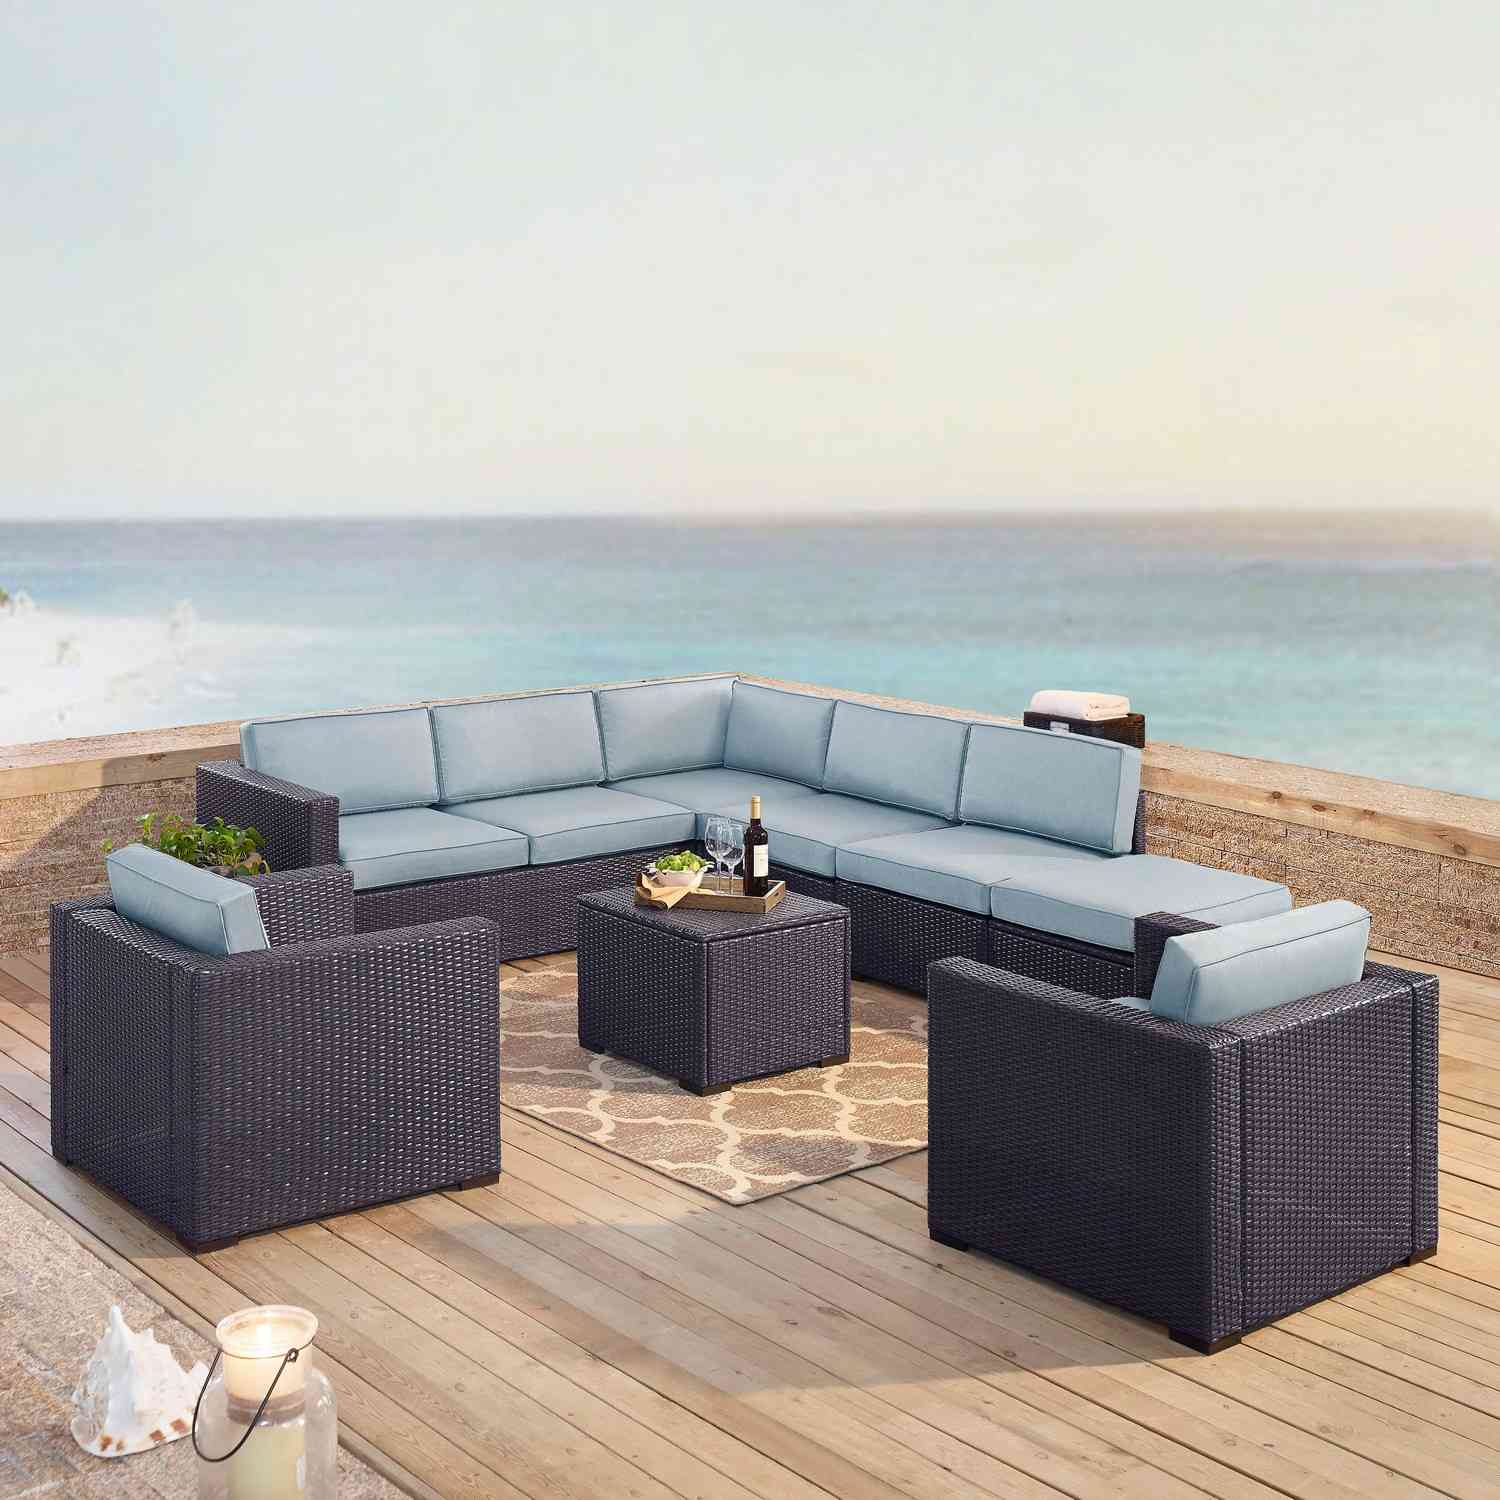 Crosley Biscayne 7-PC Outdoor Wicker Sectional Set - 2 Loveseats, 2 Arm Chairs, Armless Chair, Coffee Table, Ottoman - Mist/Brown